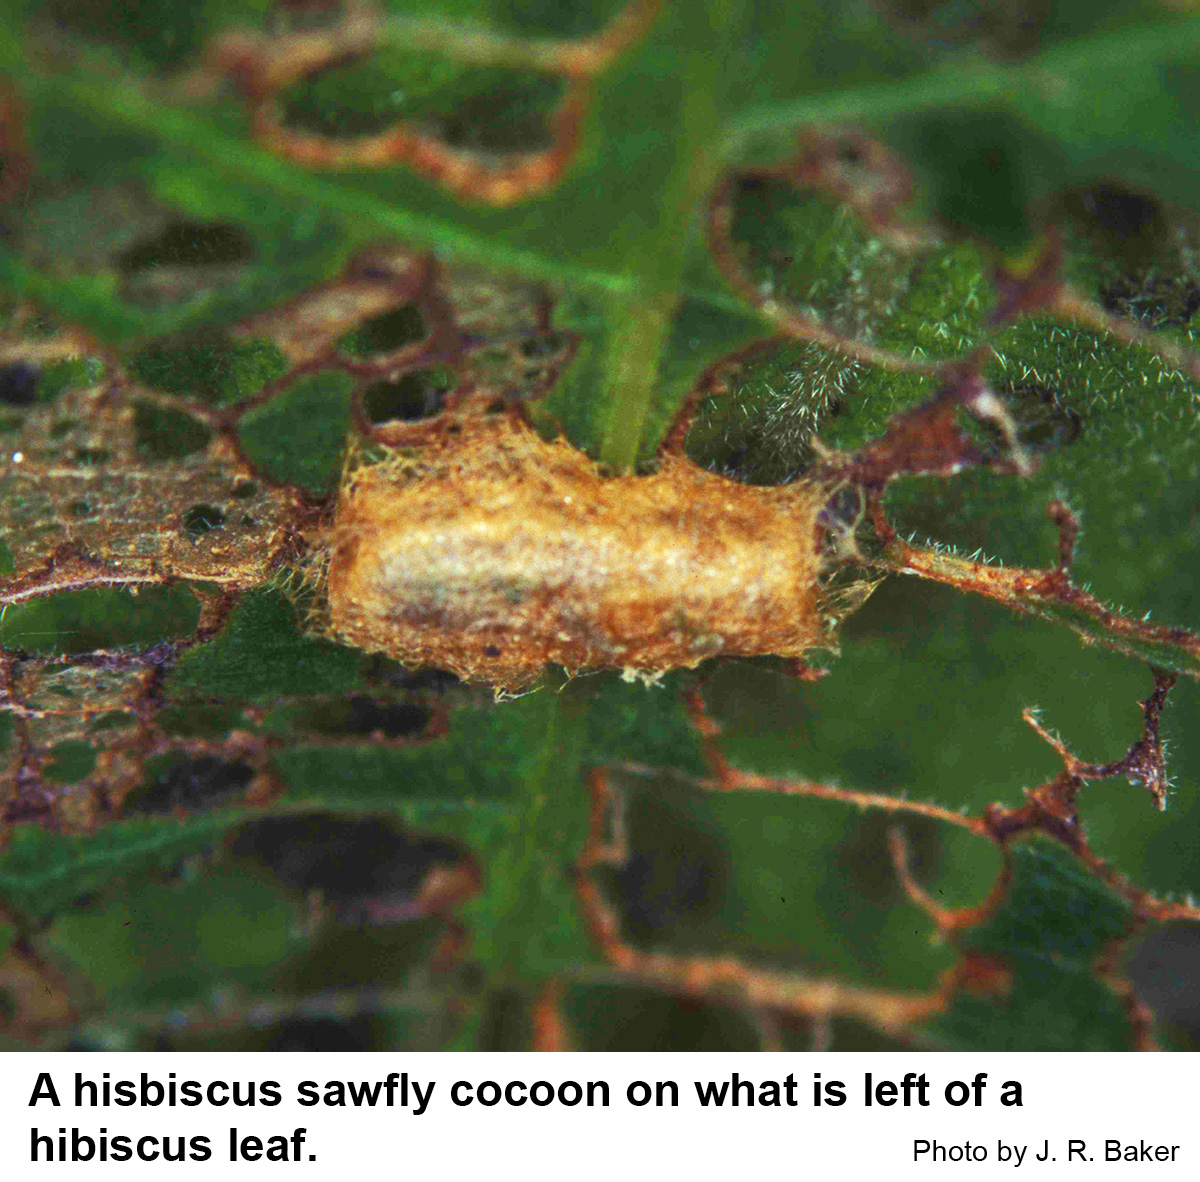 Mature hibiscus sawfly caterpillars spin a tough, brownis cocoon